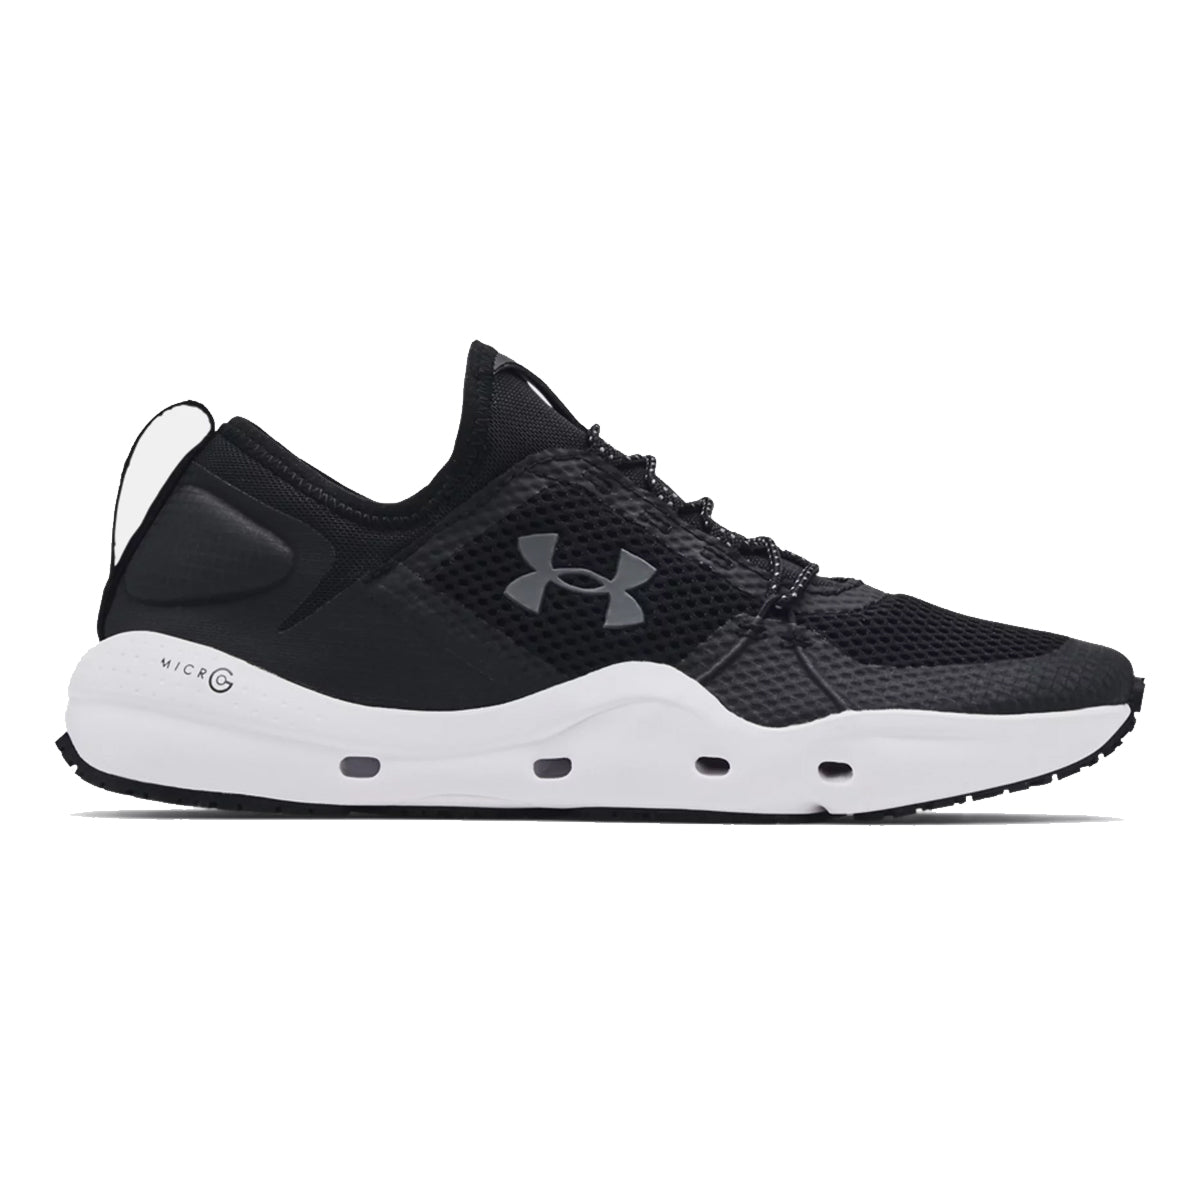 Under Armour Micro G Kilchis Fishing Shoes